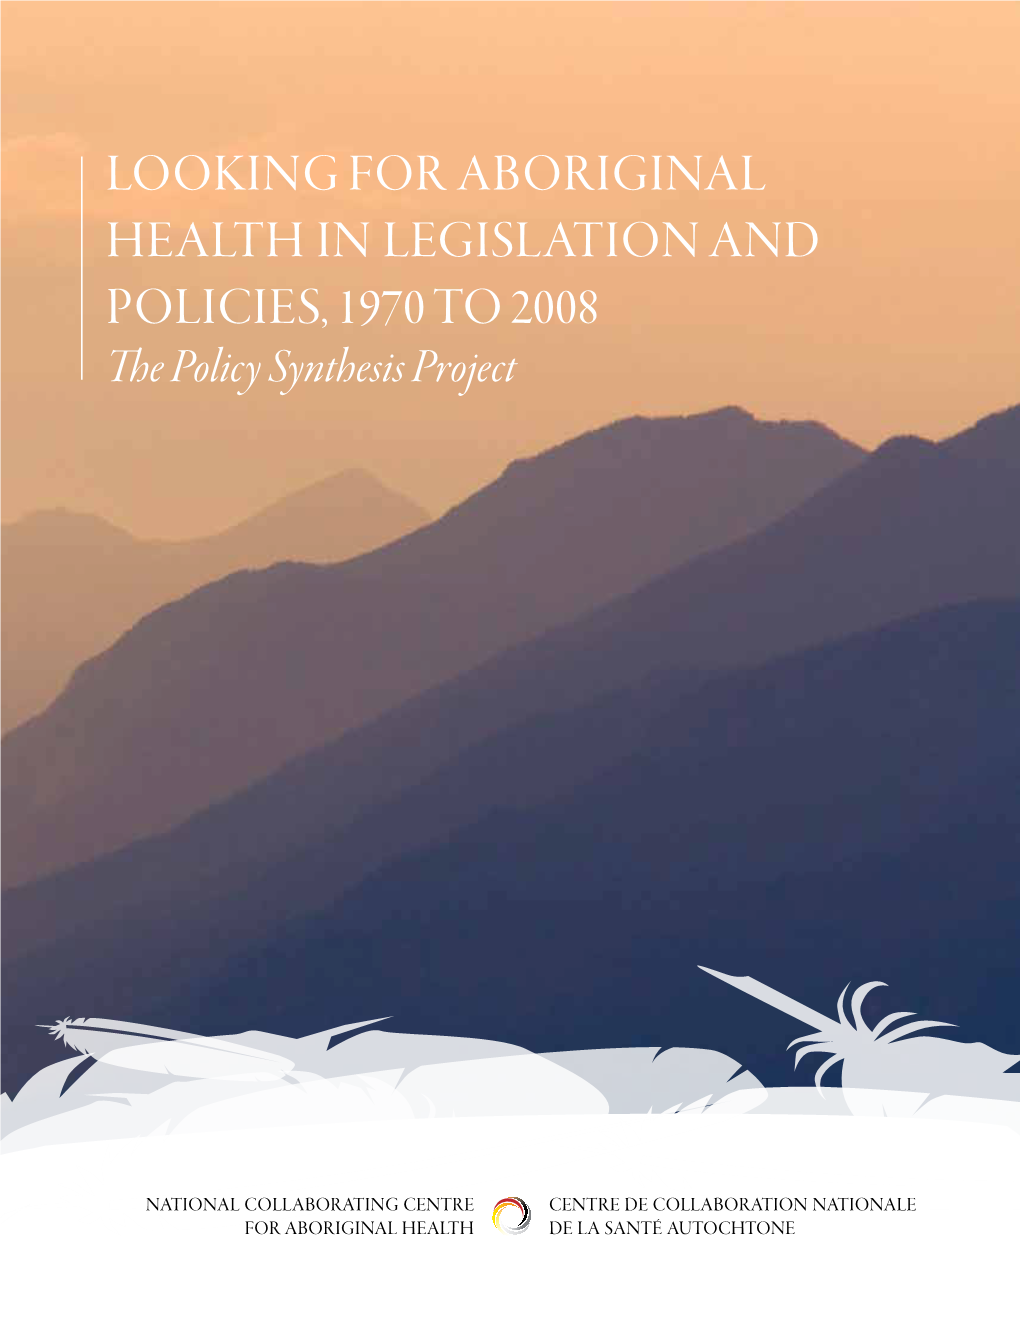 LOOKING for ABORIGINAL HEALTH in LEGISLATION and POLICIES, 1970 to 2008 the Policy Synthesis Project